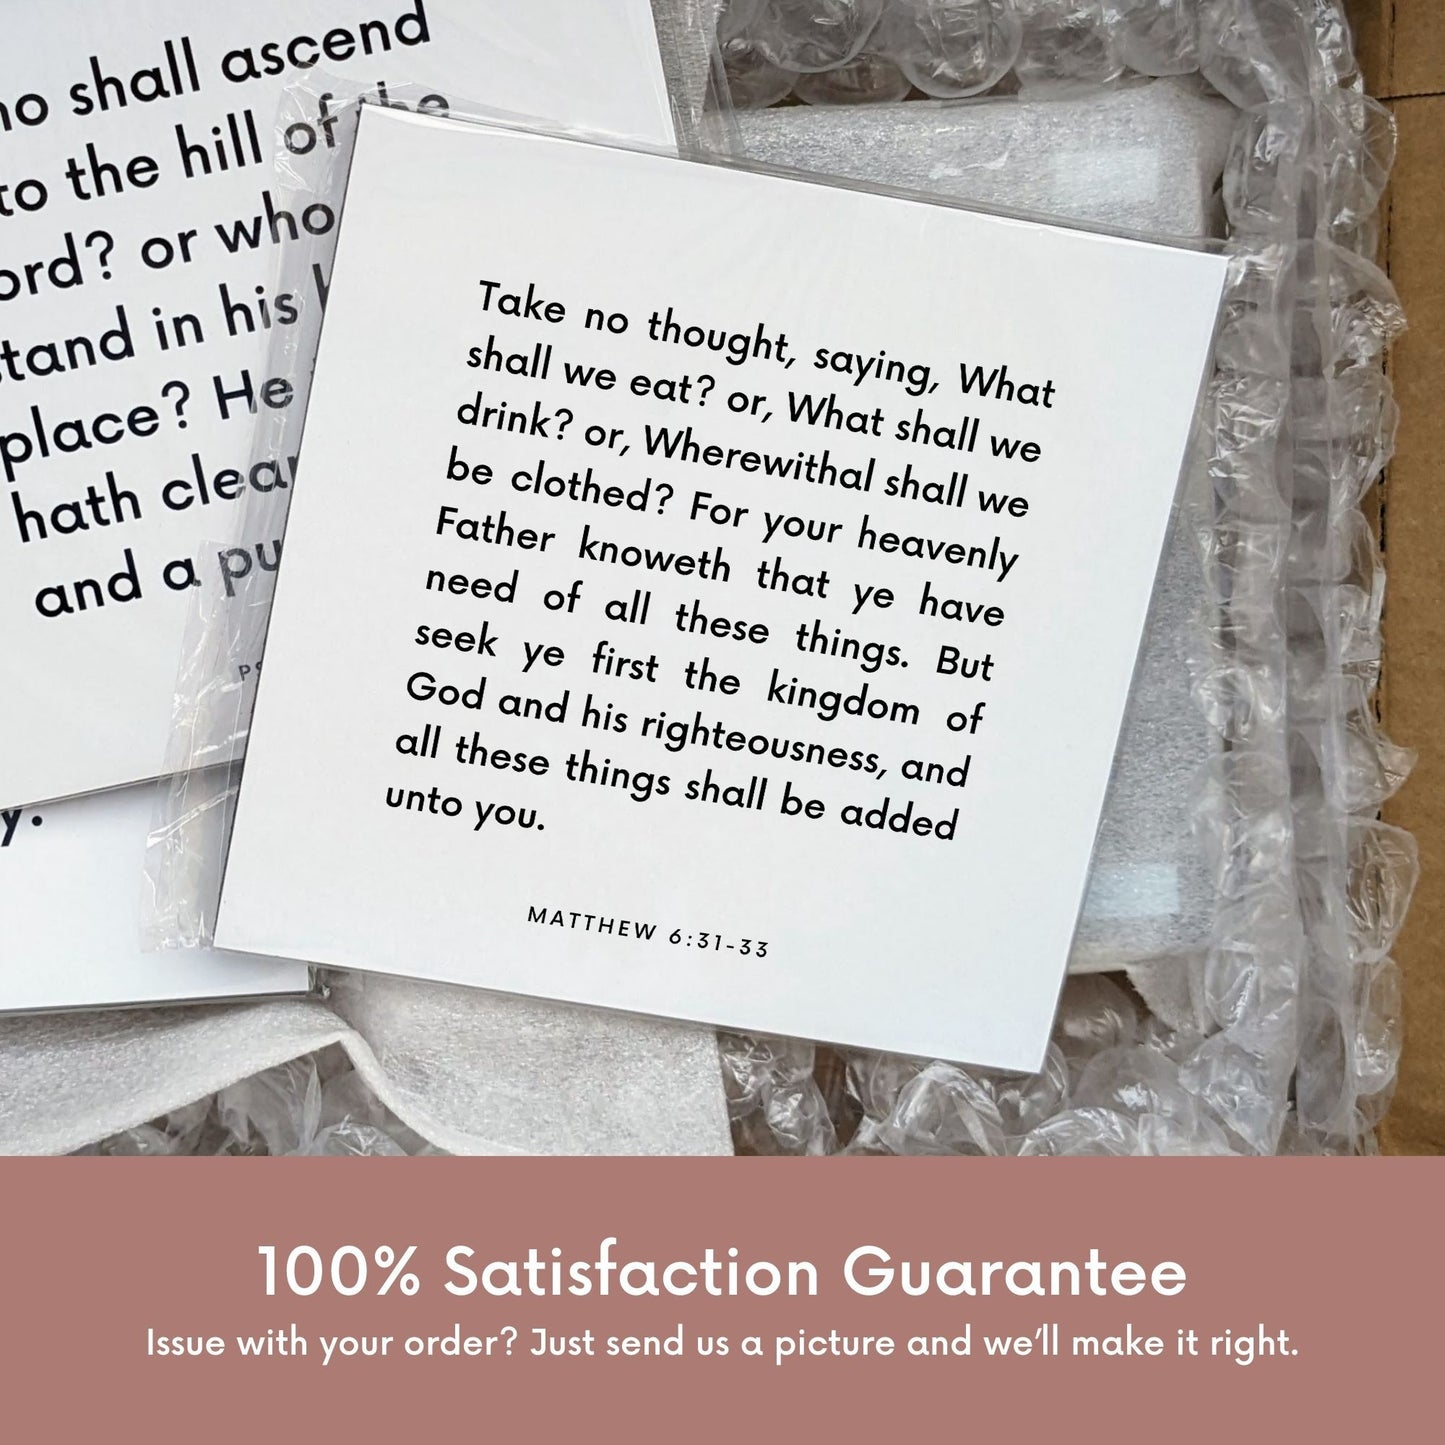 Shipping materials for scripture tile of Matthew 6:31-33 - "Seek ye first the kingdom of God and his righteousness"